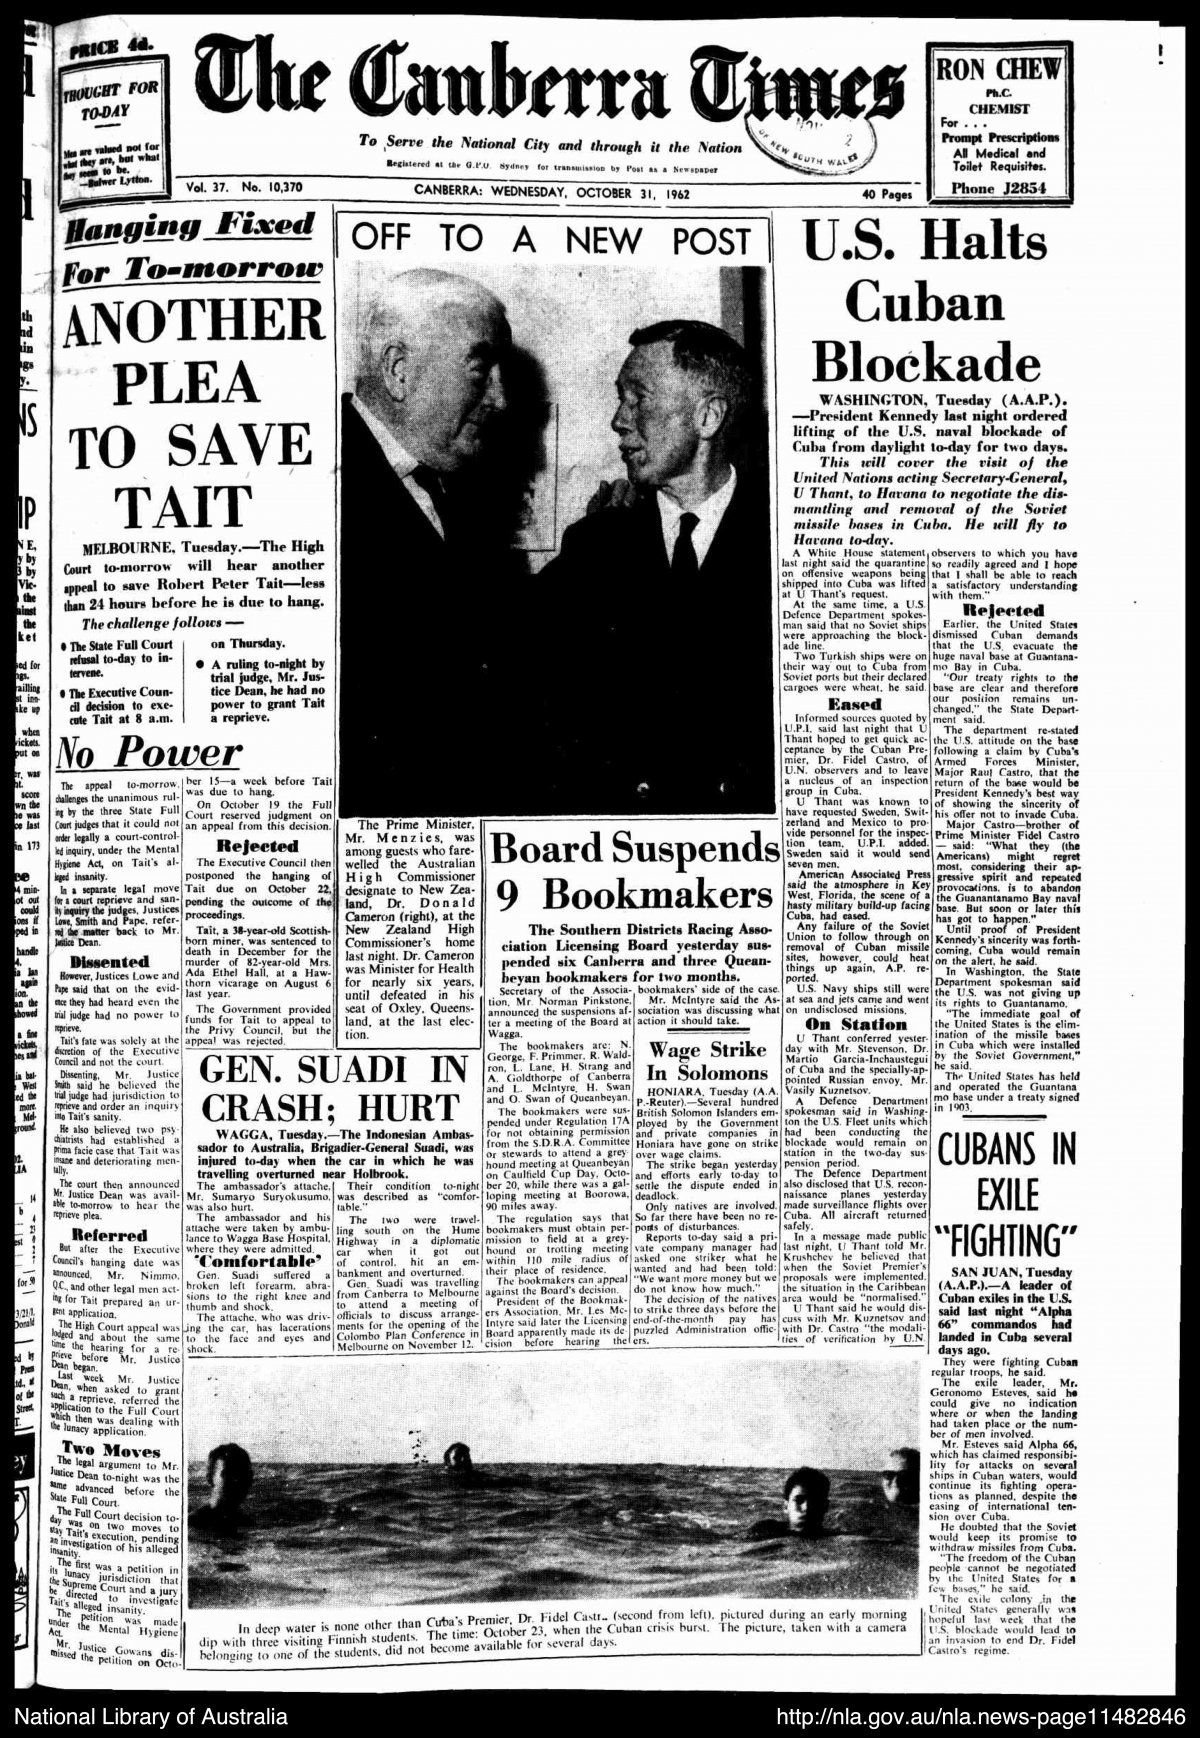 The front page of The Canberra Times newspaper. Several headlines scatter the page. One reads "U.S. Halts Cuban Blockade". There is a black and white photograph of Prime Minister Menzies shaking hands with Donald Cameron, High Commissioner to New Zealand